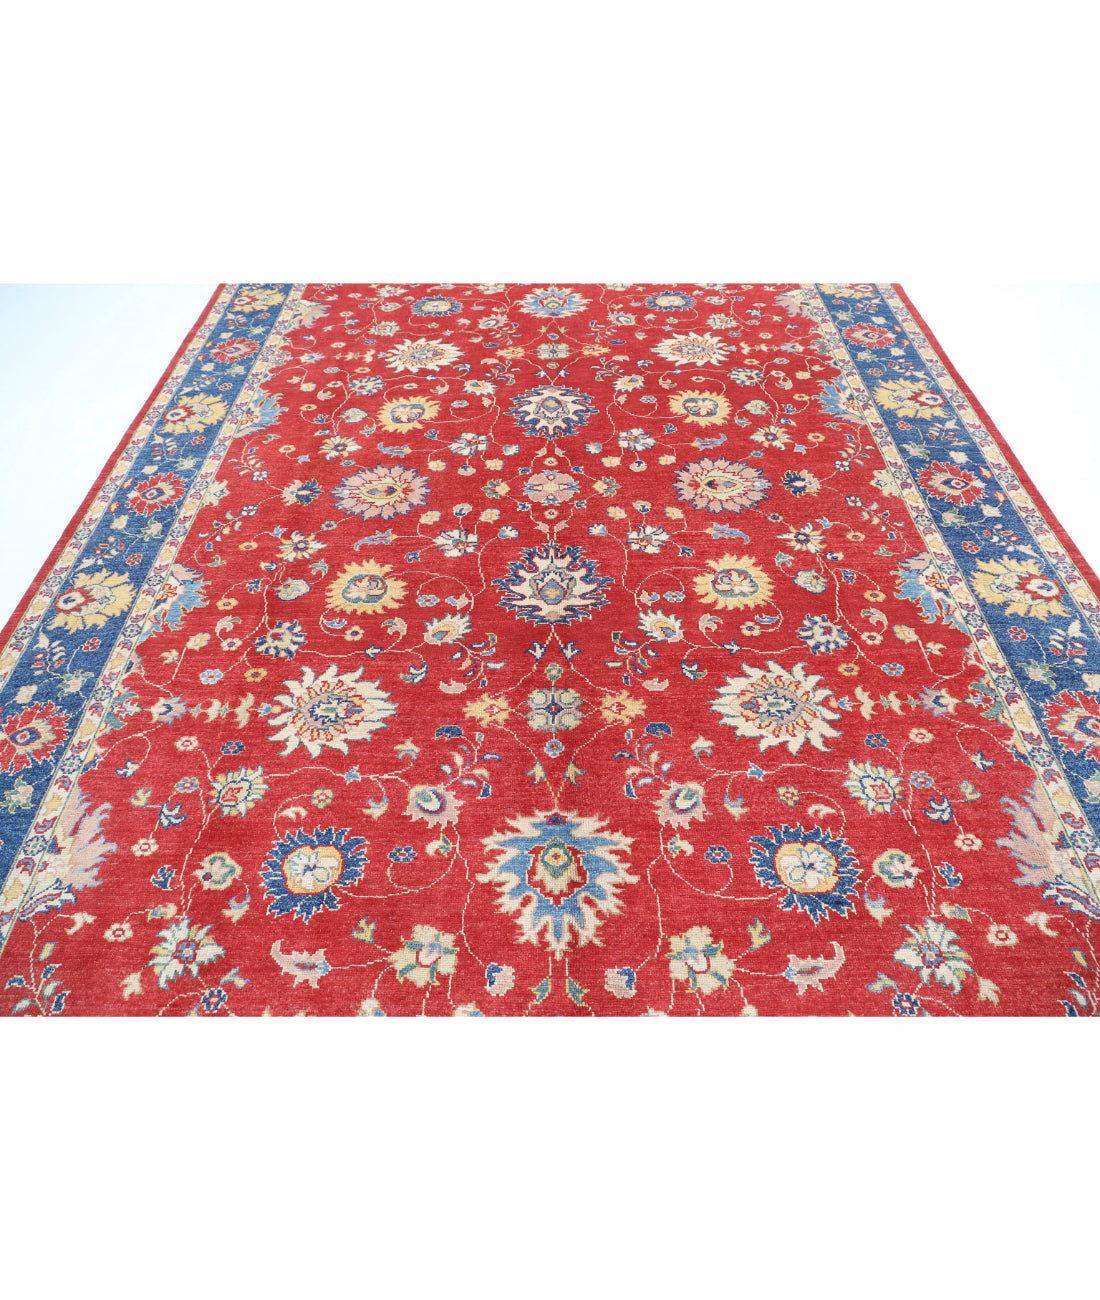 Ziegler 8'11'' X 11'8'' Hand-Knotted Wool Rug 8'11'' x 11'8'' (268 X 350) / Red / Blue